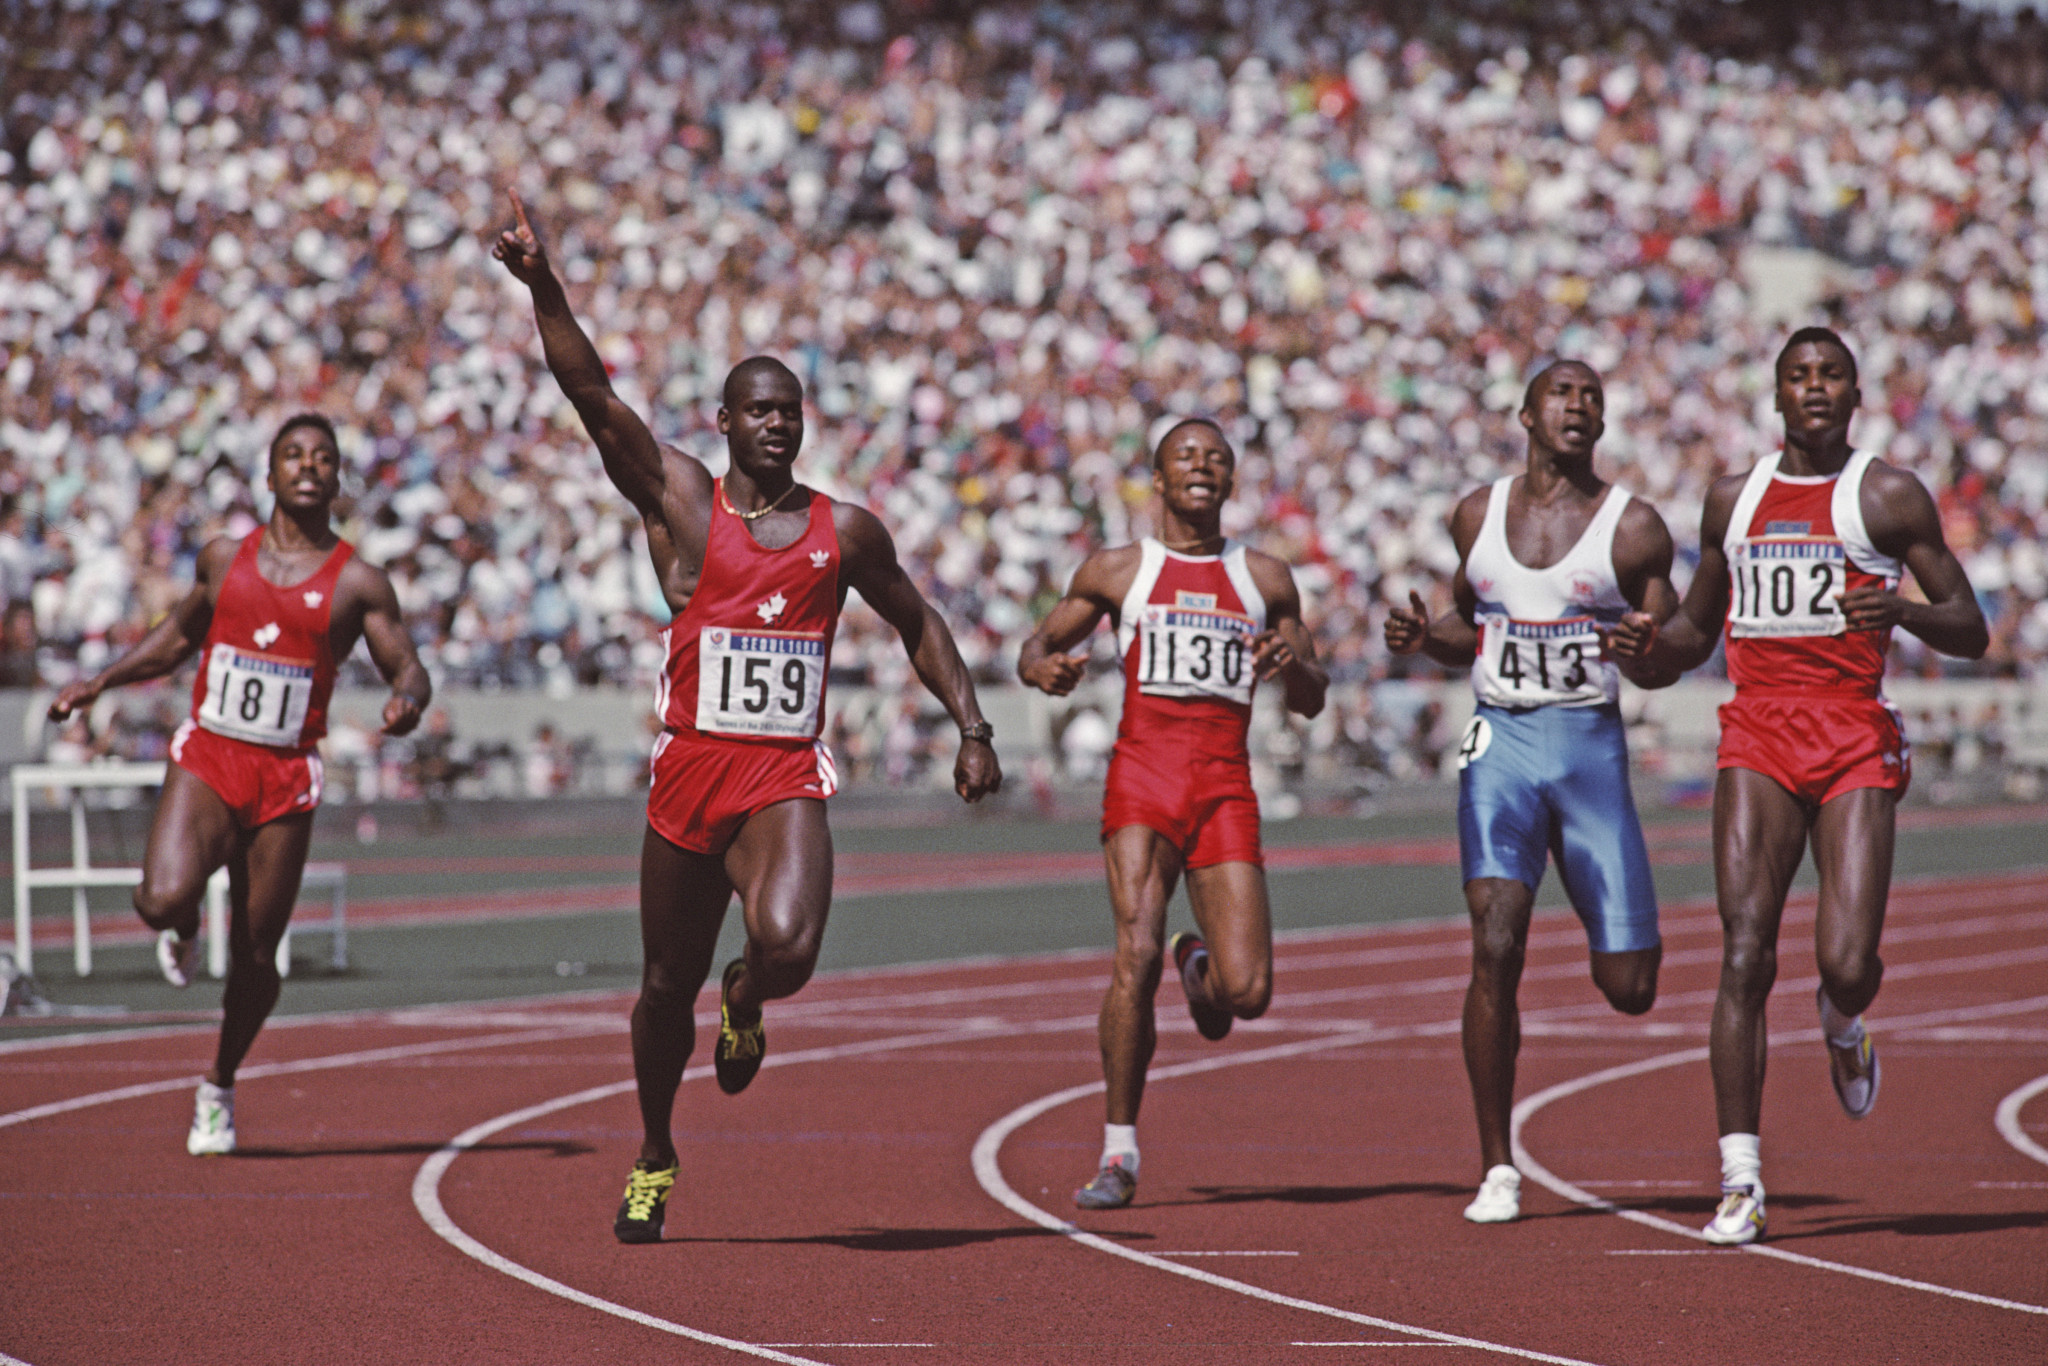 Canada's Desai Williams, furthest left, placed sixth in the men's 100m final at the Seoul 1988 Olympics, a race won by compatriot Ben Johnson, second left, who was later stripped of his gold medal ©Getty Images